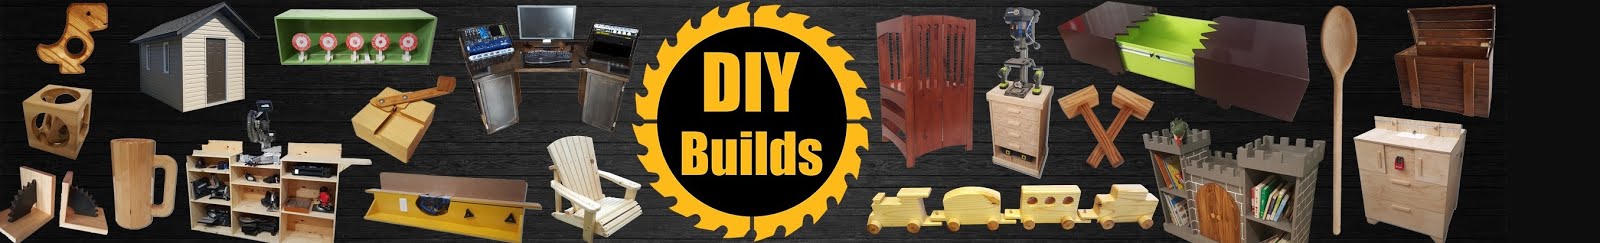 Do It Yourself Builds